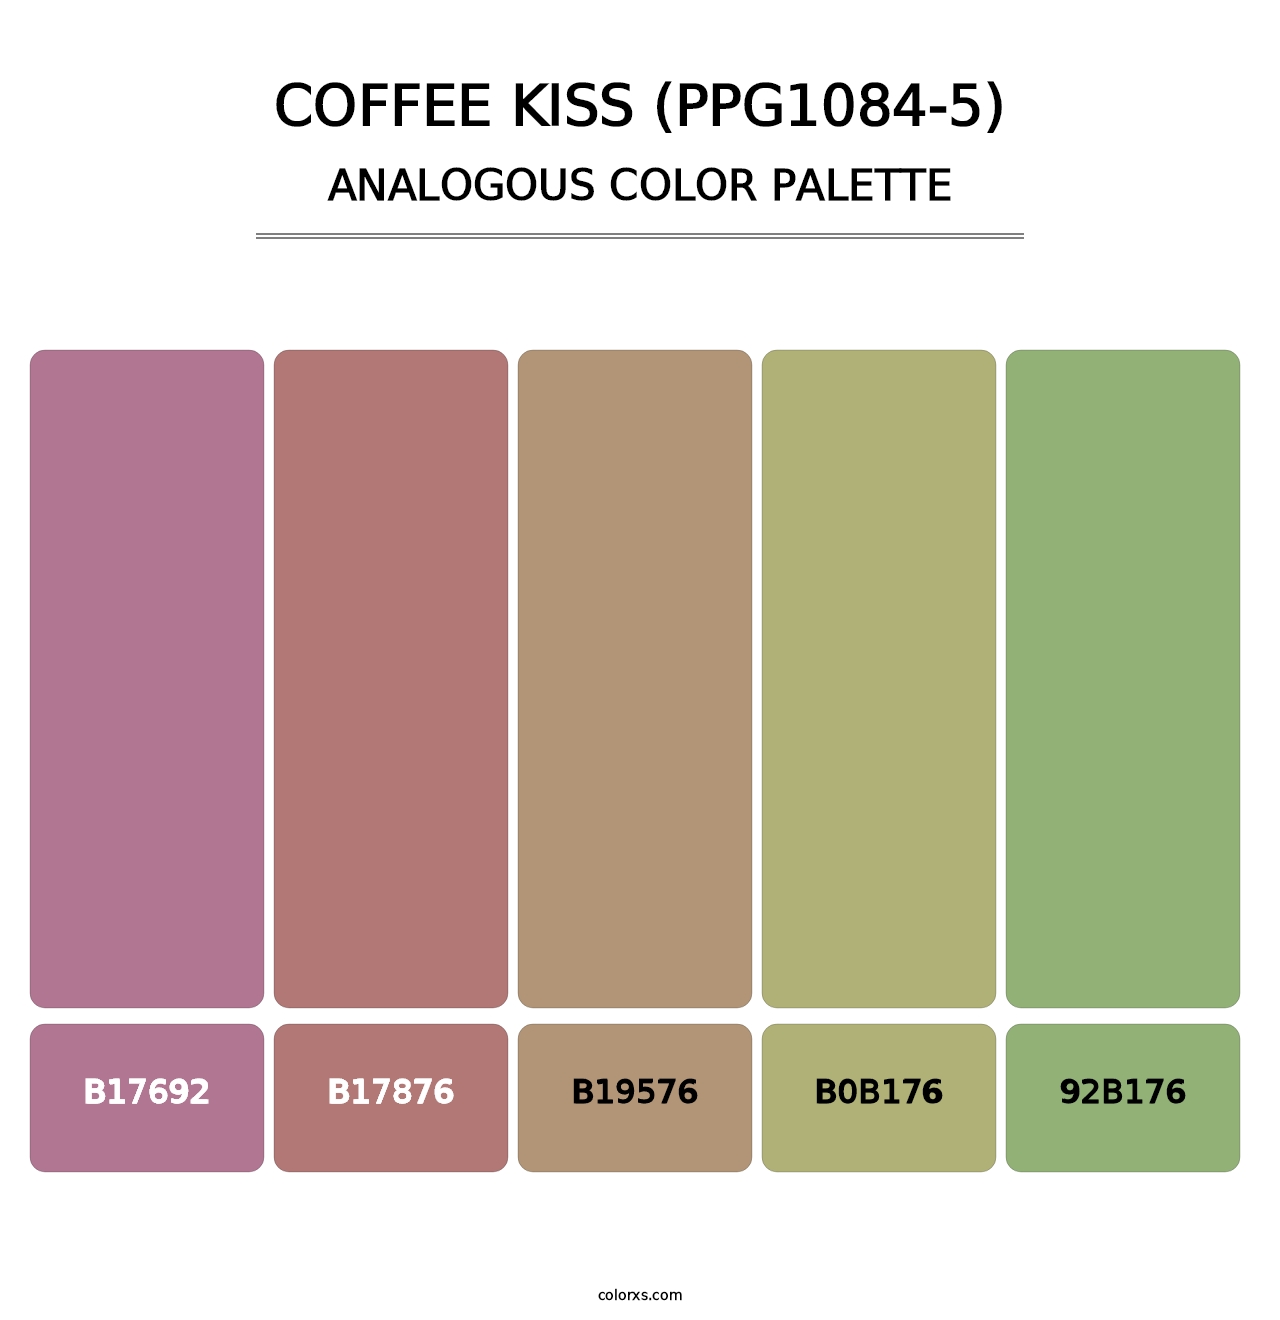 Coffee Kiss (PPG1084-5) - Analogous Color Palette